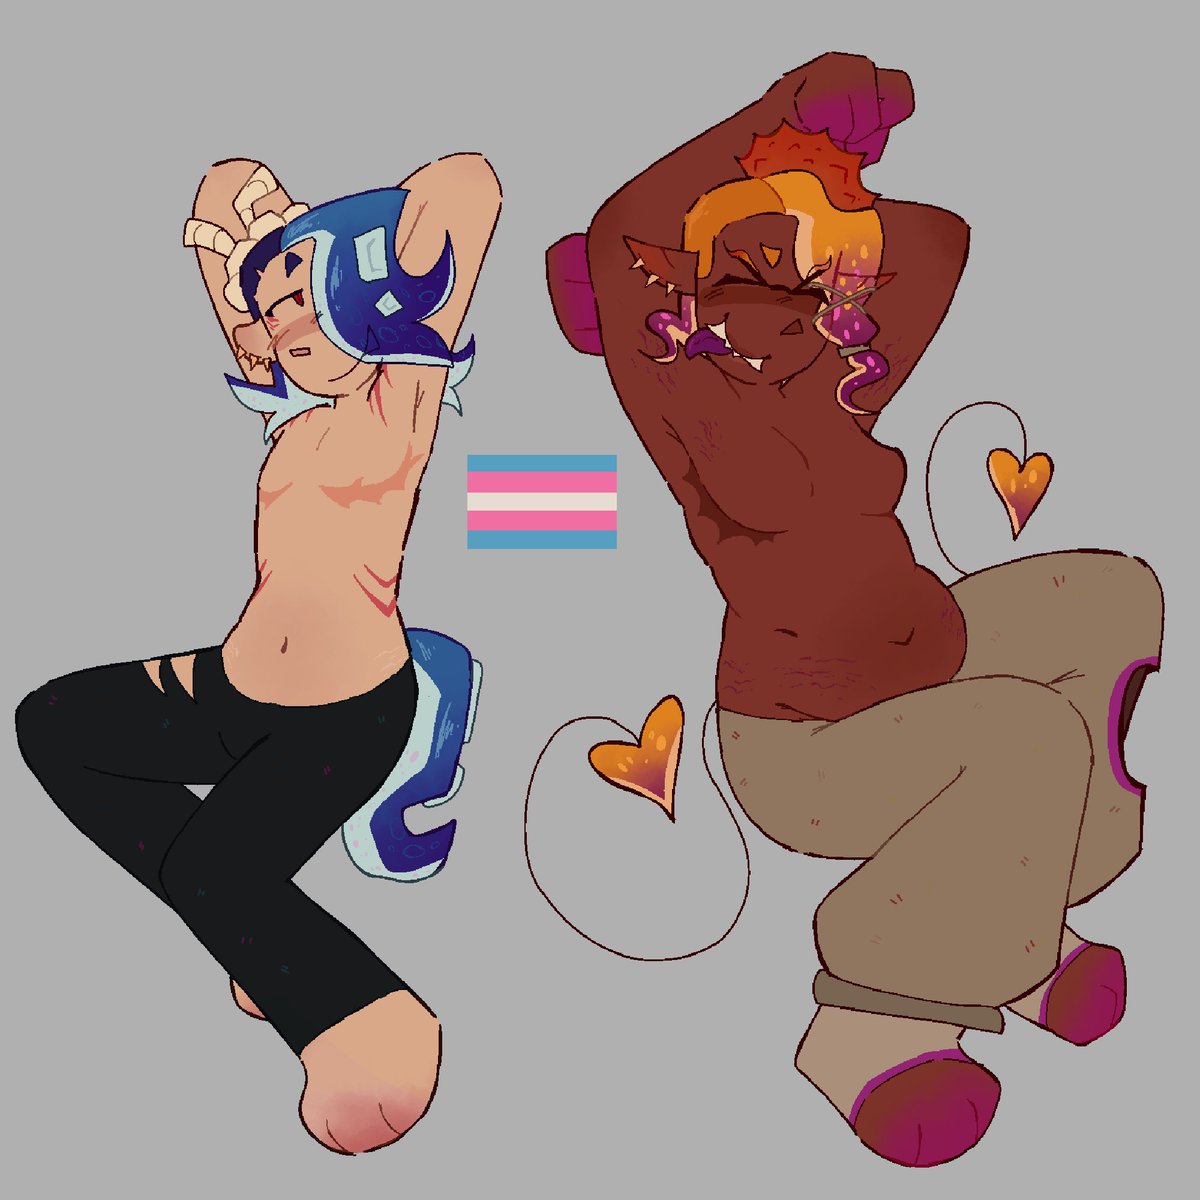 this was gonna say trans bodies are beautiful but idk how to make it fit so... mew..!!! anyways i ove them so much!!!!! (transmasc and transfem respectively)
#deepcut #frye #shiver #splatoon3